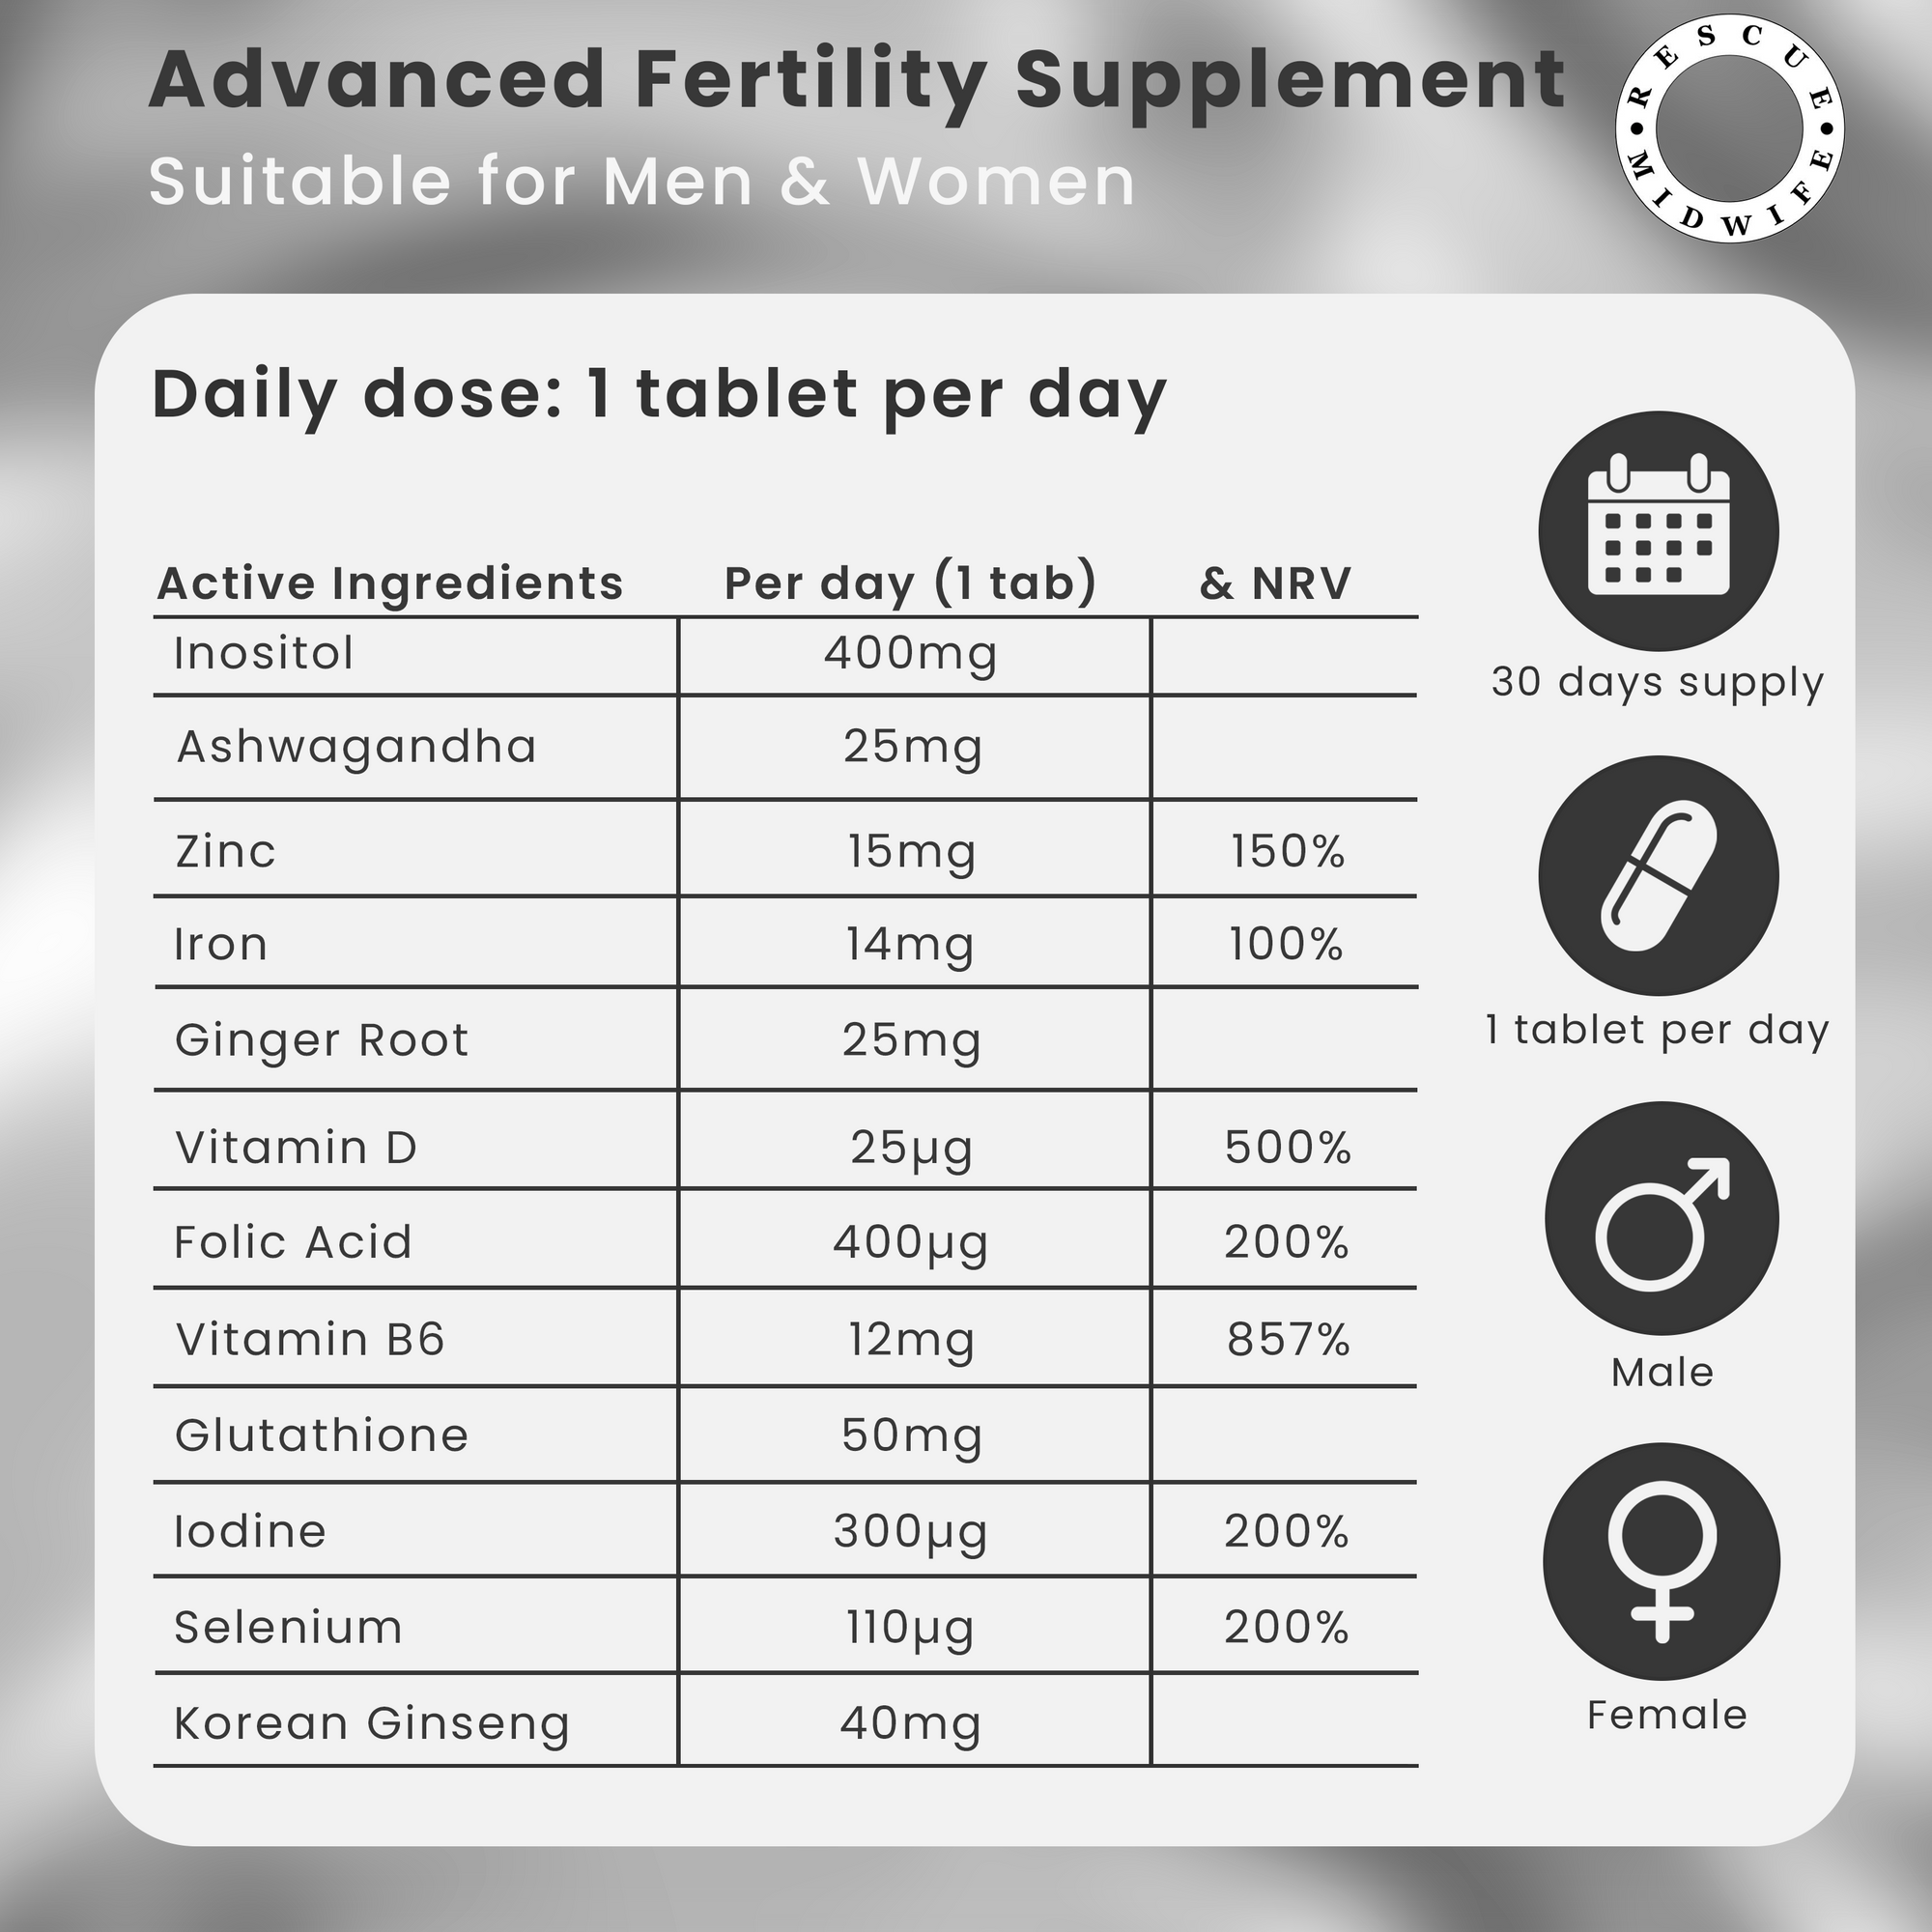 Fertility Supplement - 1 MONTH SUPPLY FOR 1 PERSON